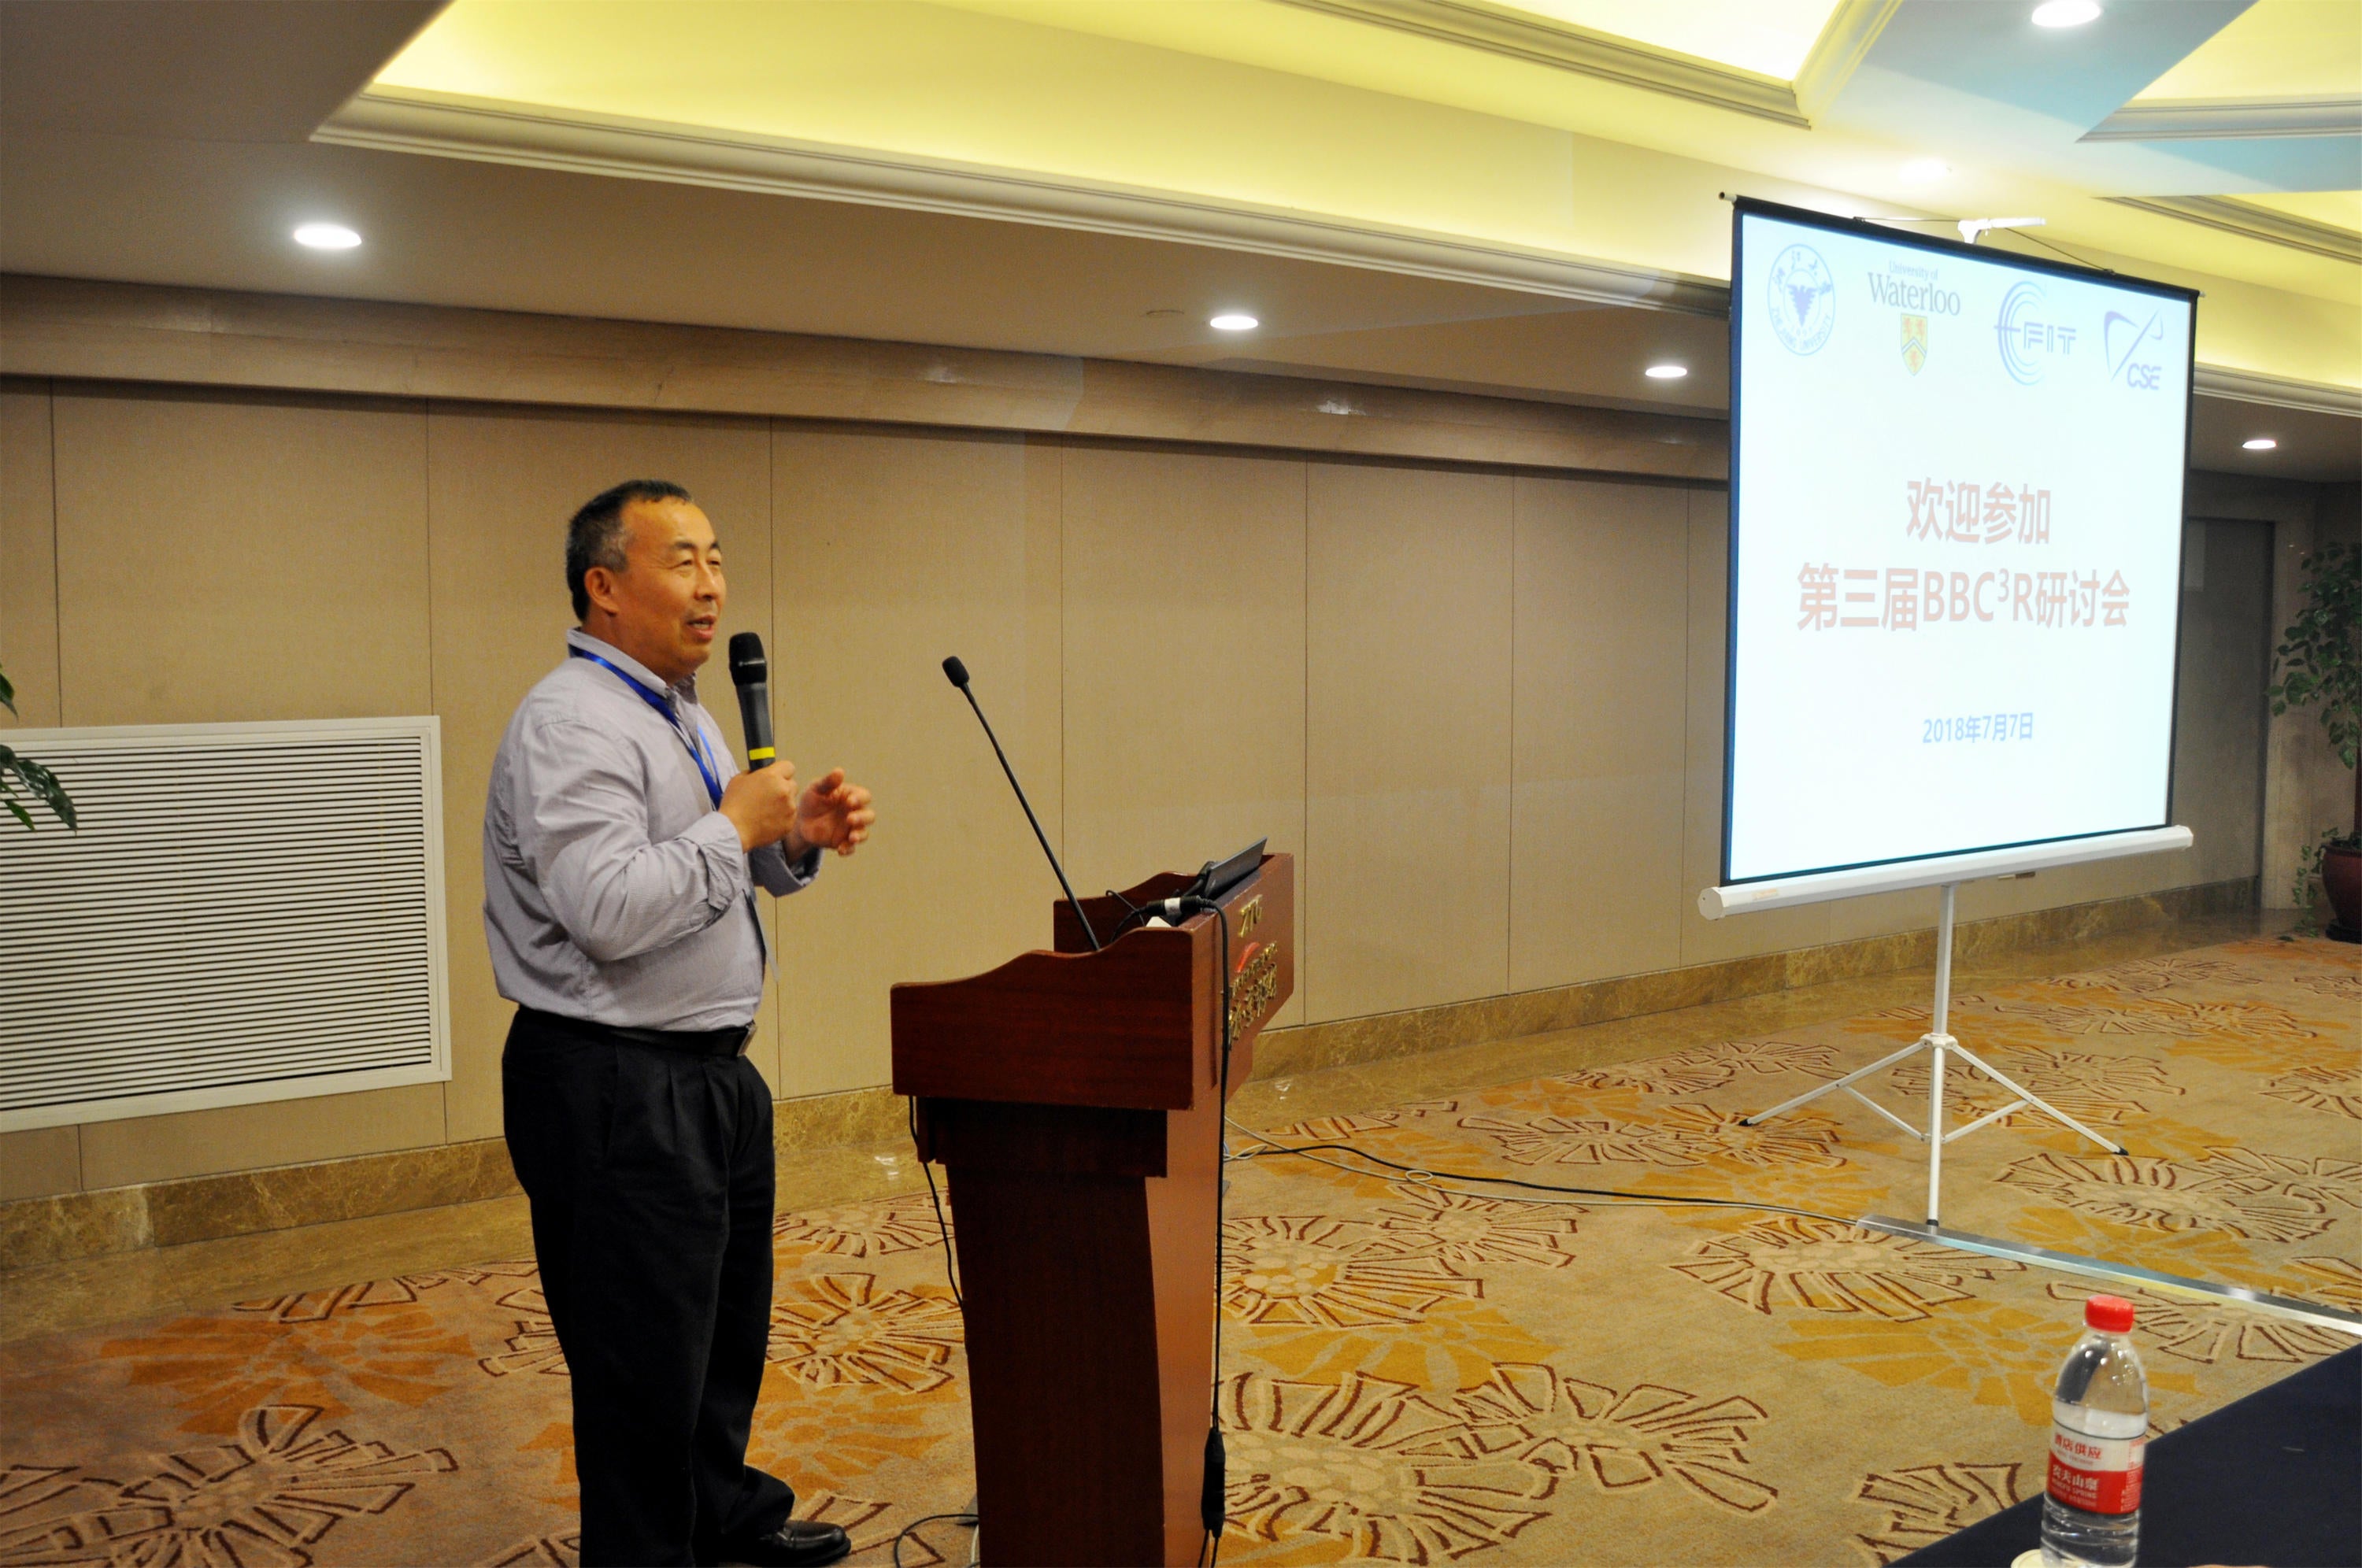 Prof. Shen attended the Second ACSIC Symposium on Frontiers in Computing (SOFC) 2018 and delivered a keynote speech, titled “Automated Driving and Connected Vehicles”, Dallas, US, June 1-2, 2018.